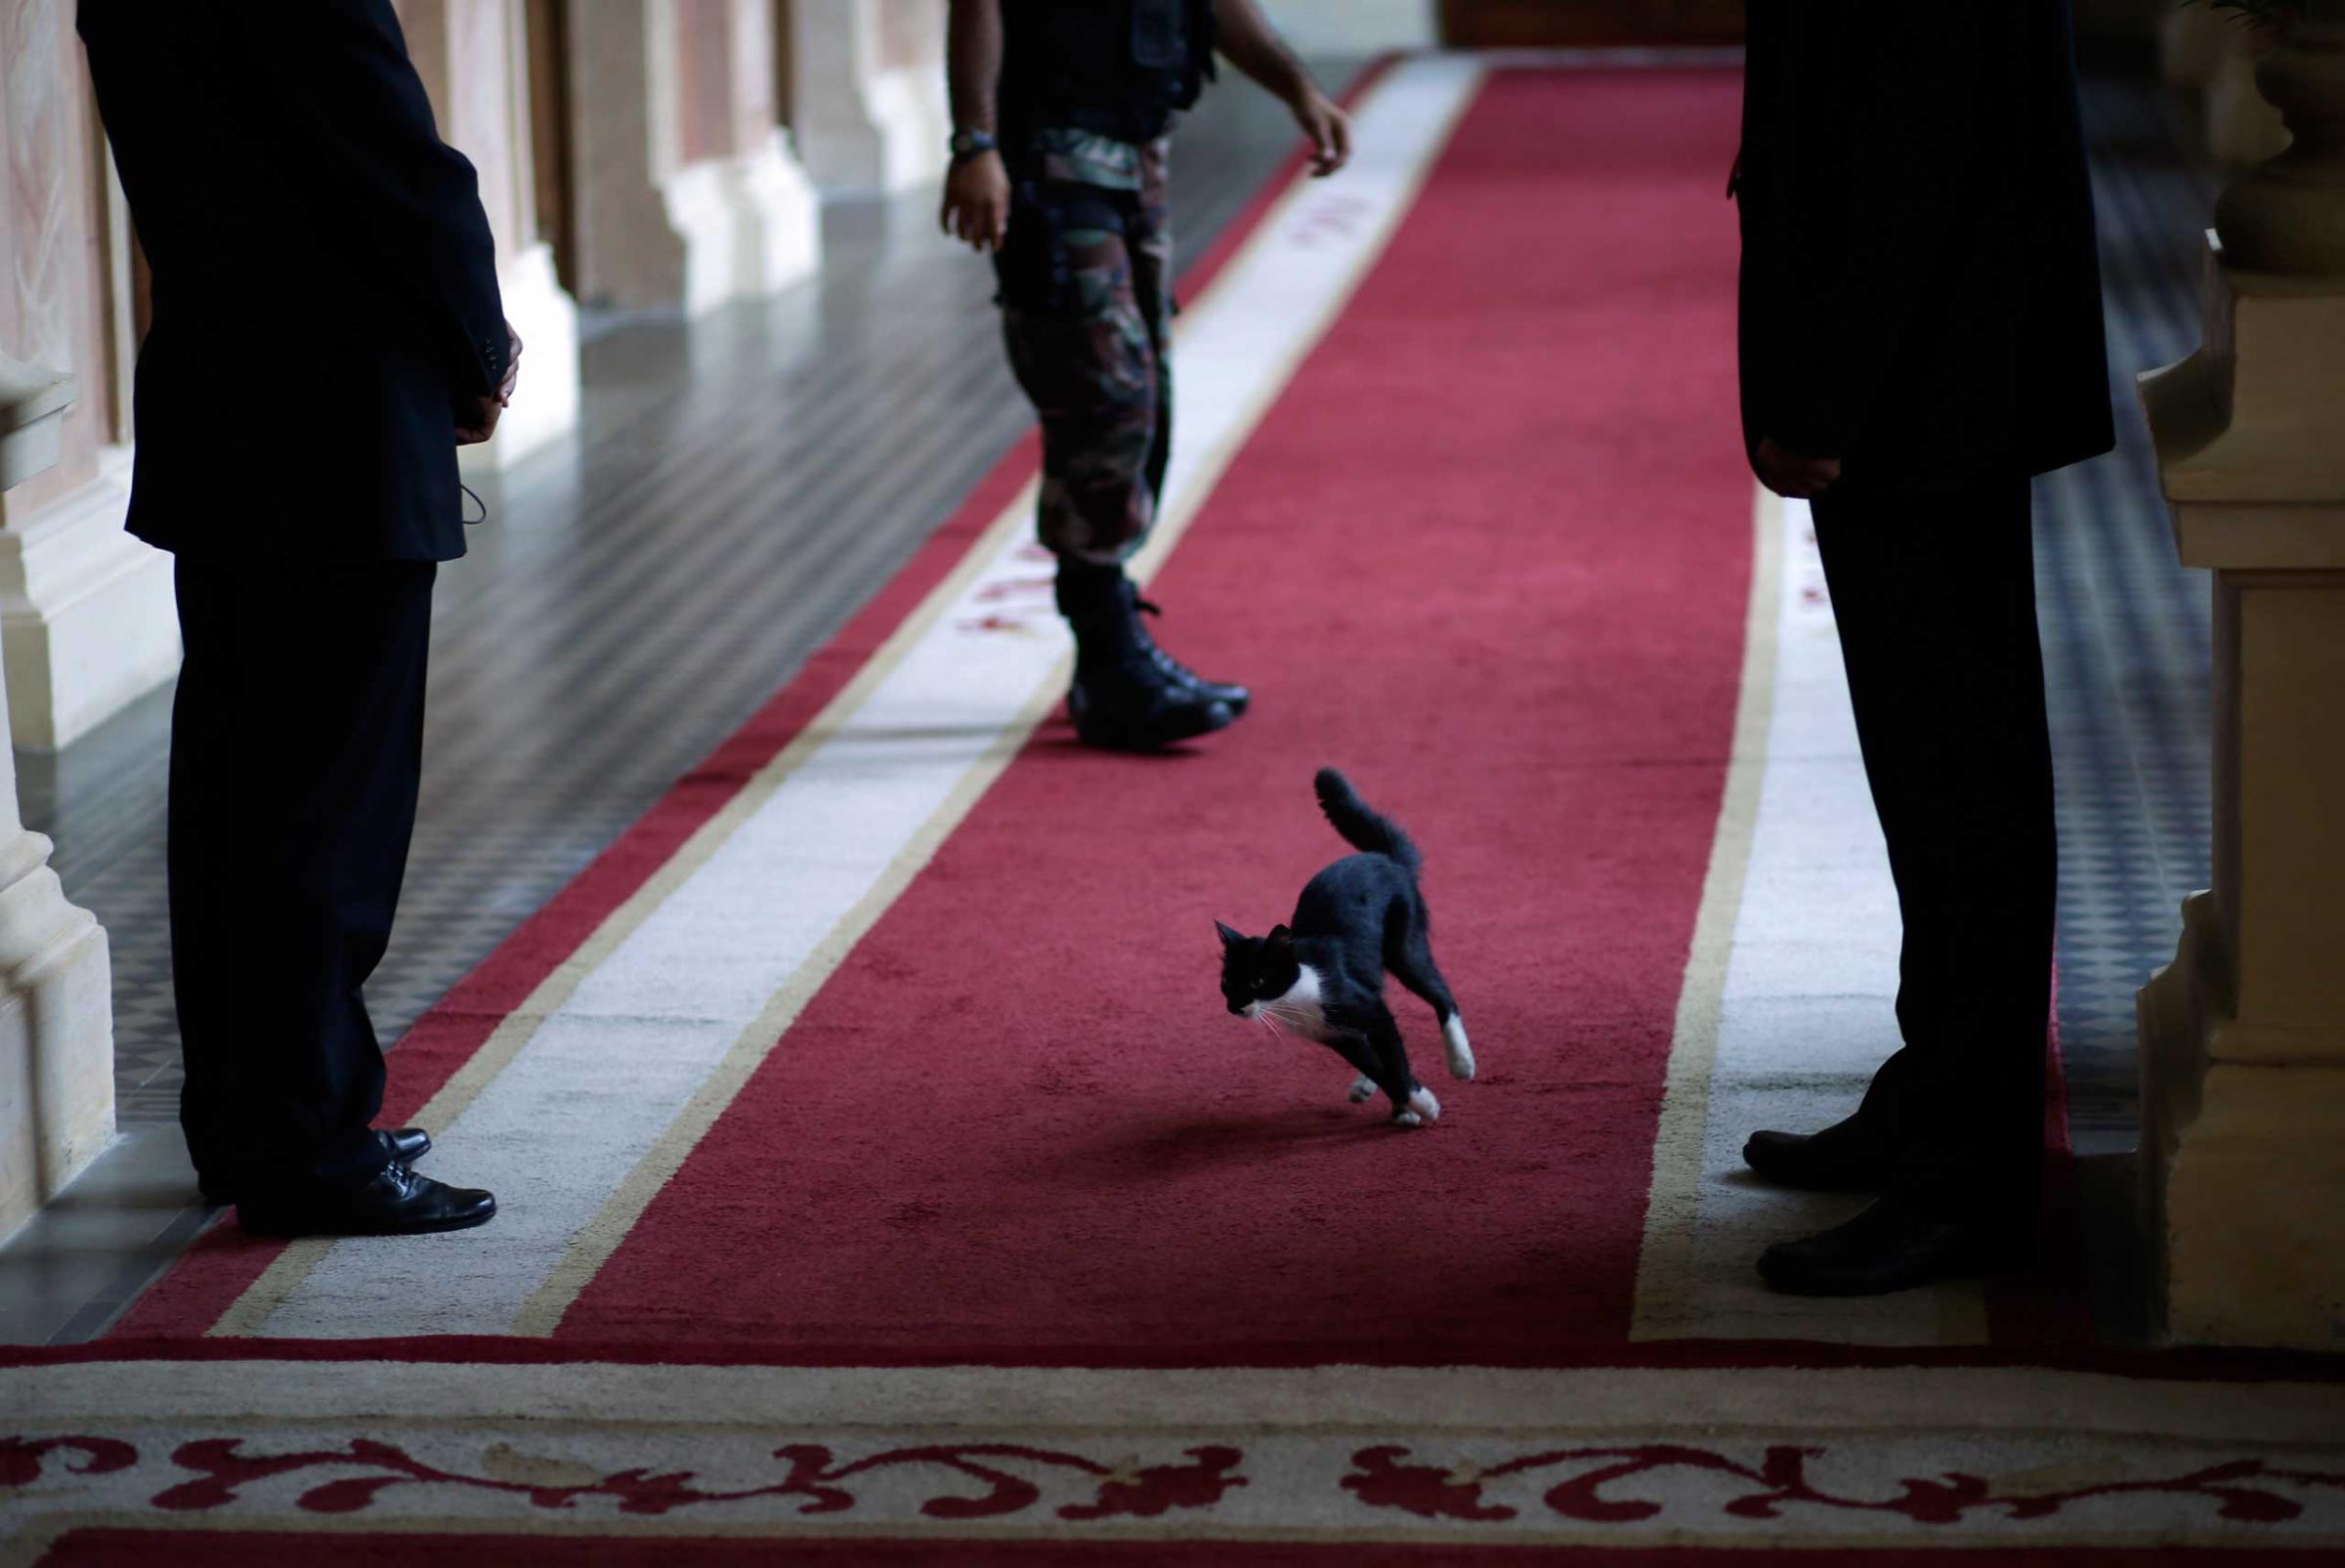 A cat tears through a government palace corridor as officials await the arrival of U.S. Assistant Secretary of State, Asuncion, Paraguay, March 20, 2014.